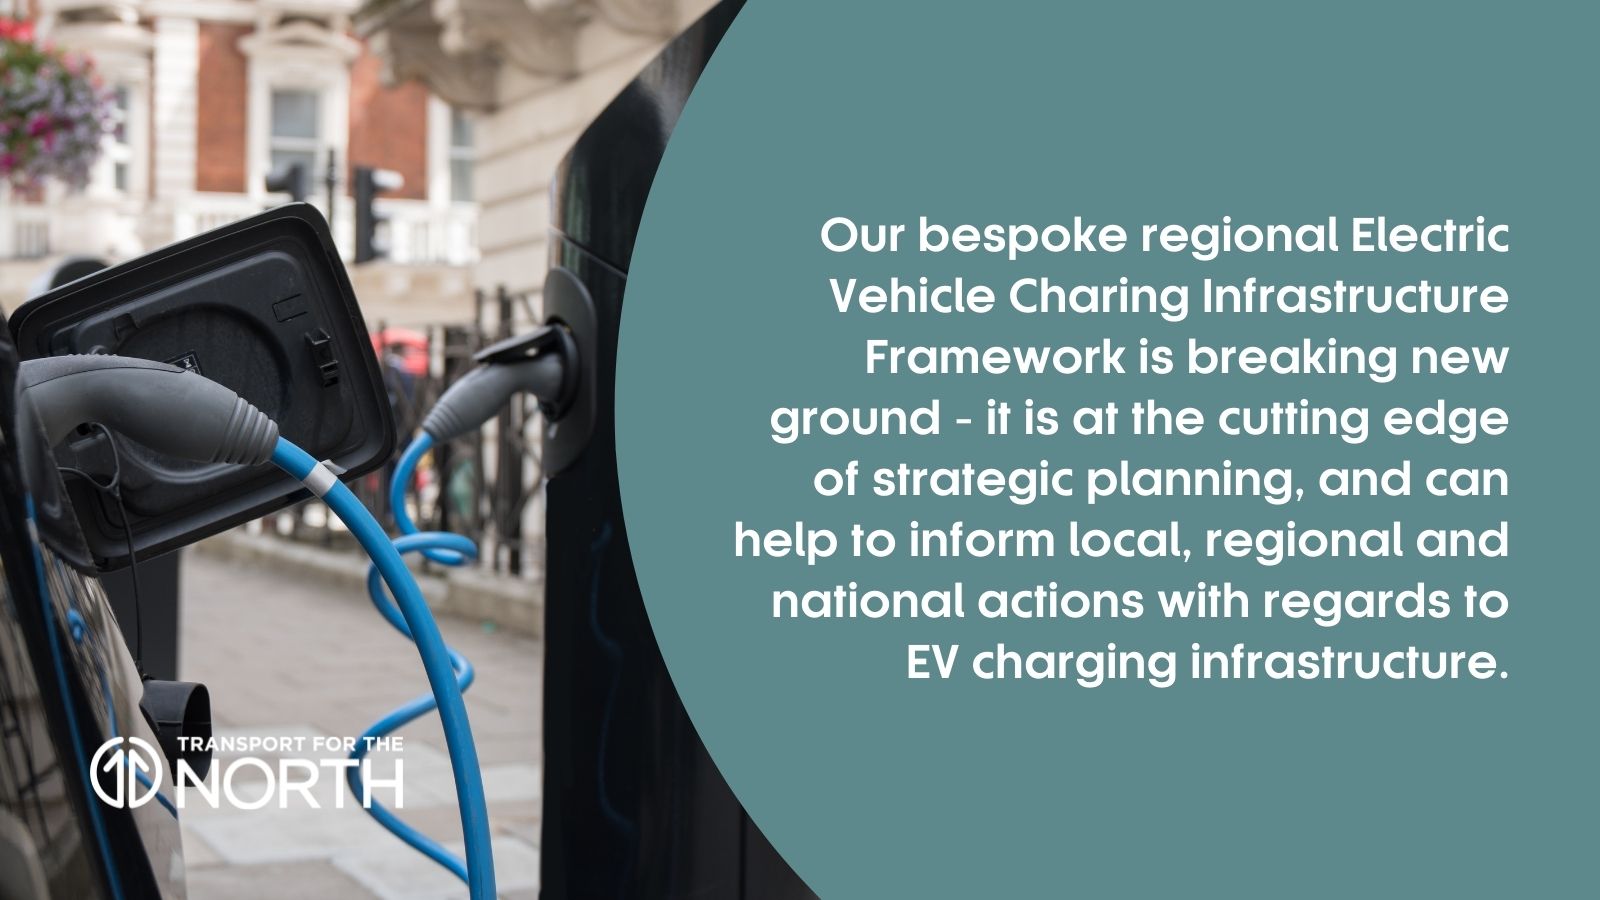 Curbside electric vehicle charging point